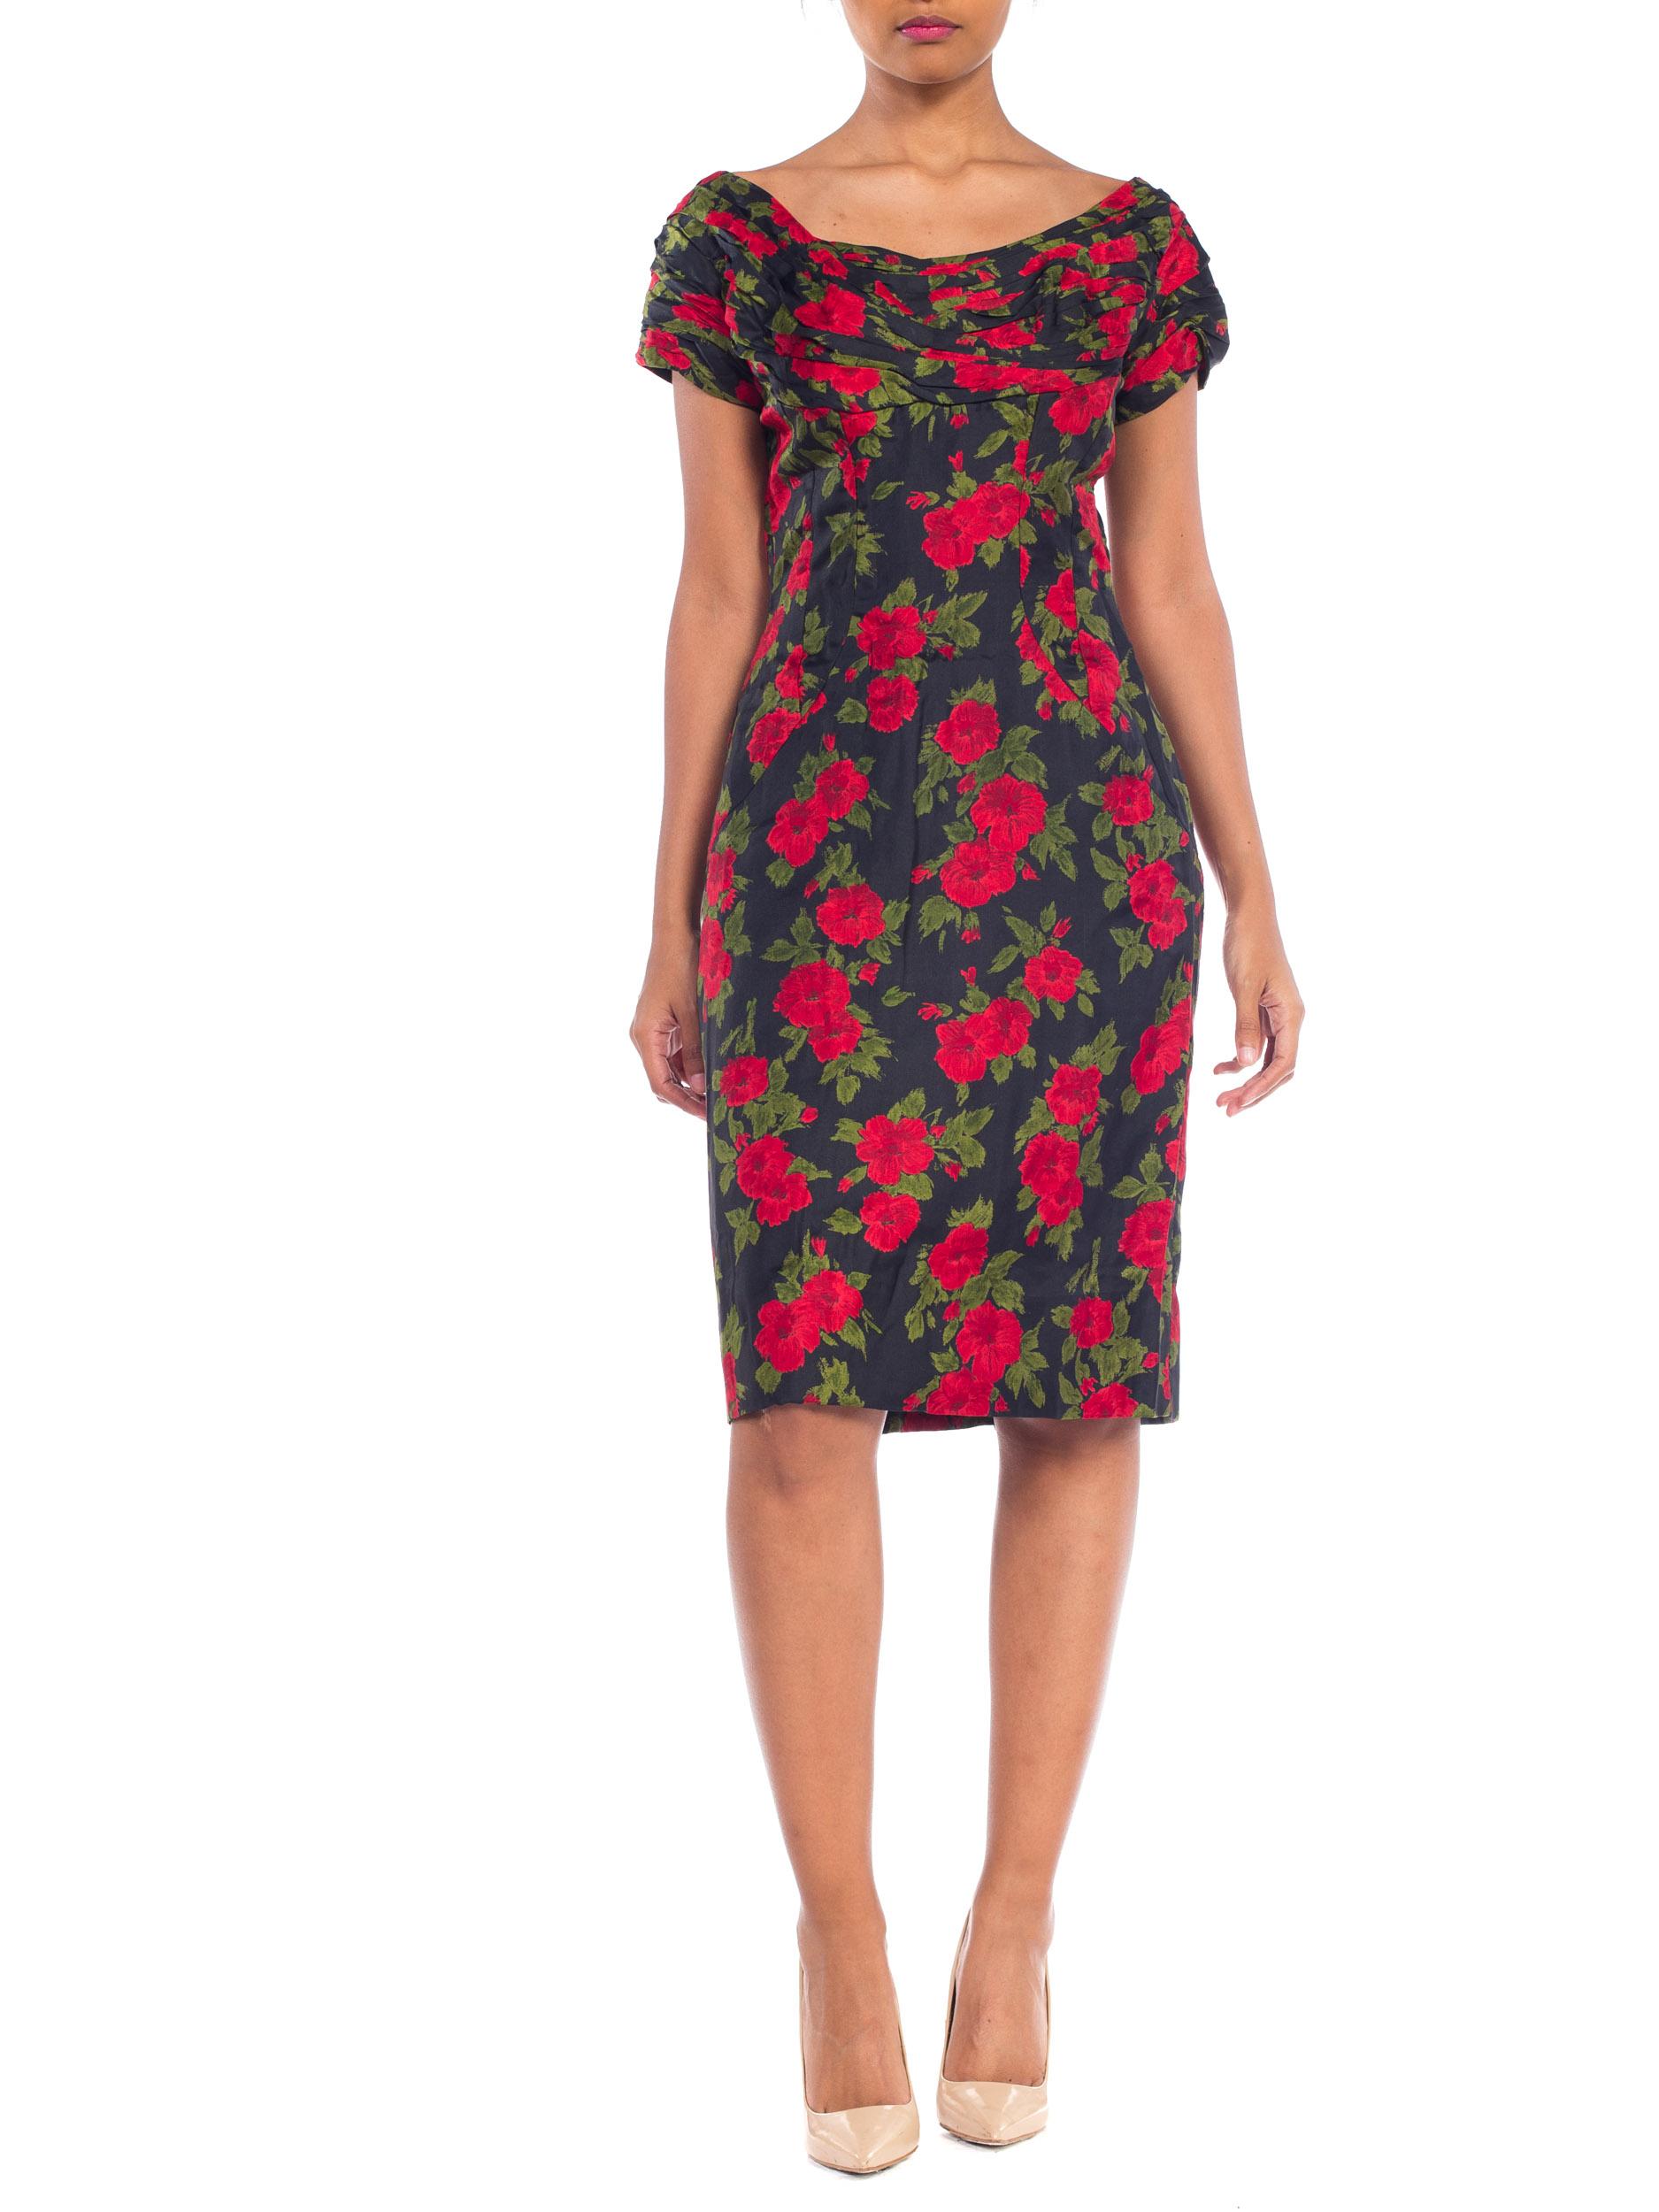 1950S DOLCE & GABBANA Style Silk Twill Red Black Classic Rose Floral Printed Dr For Sale 9